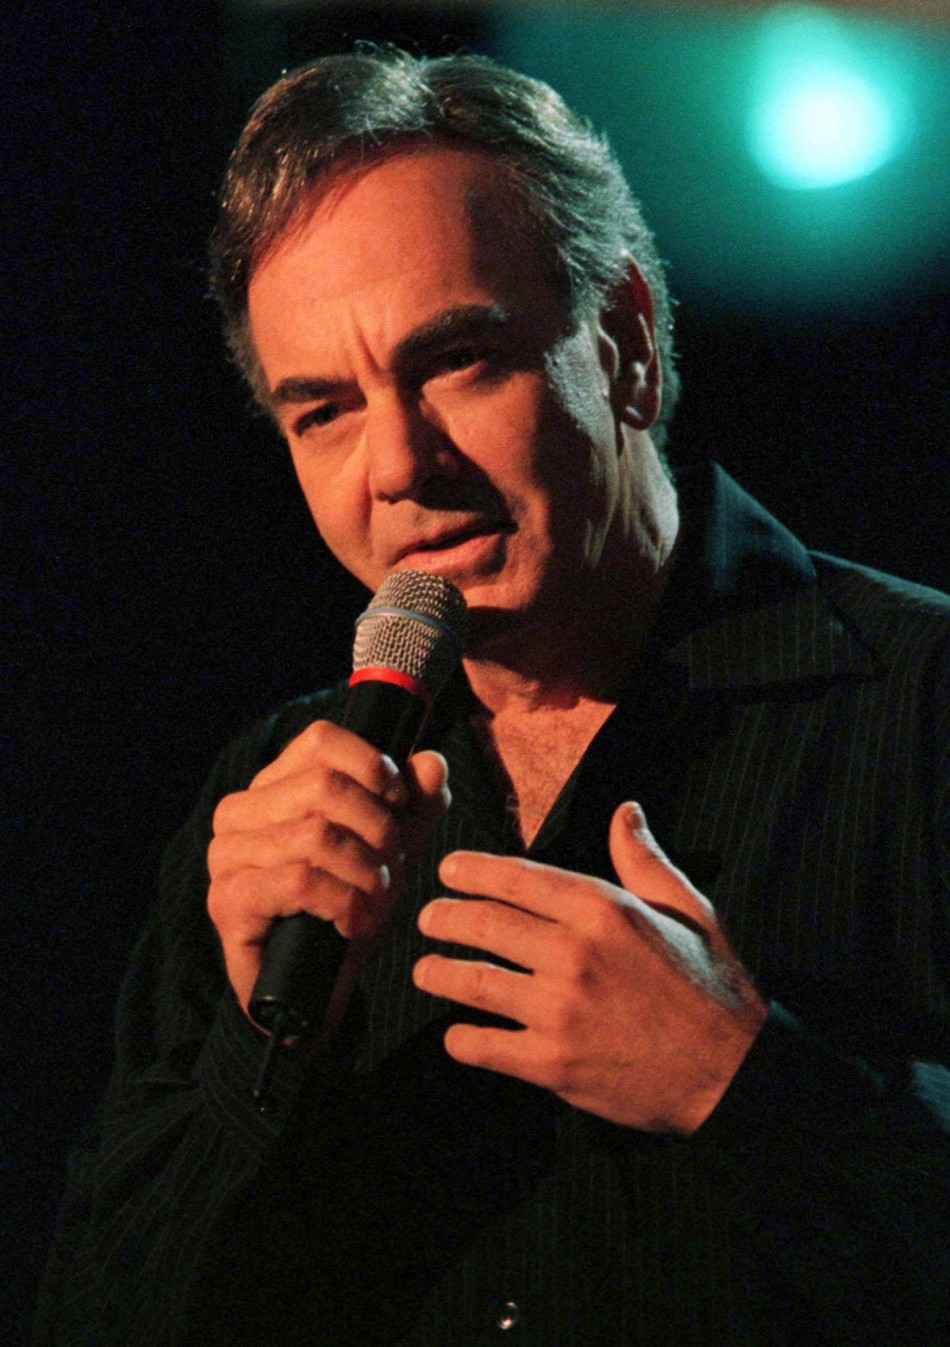 Neil Diamond and his wife divorced in 1994